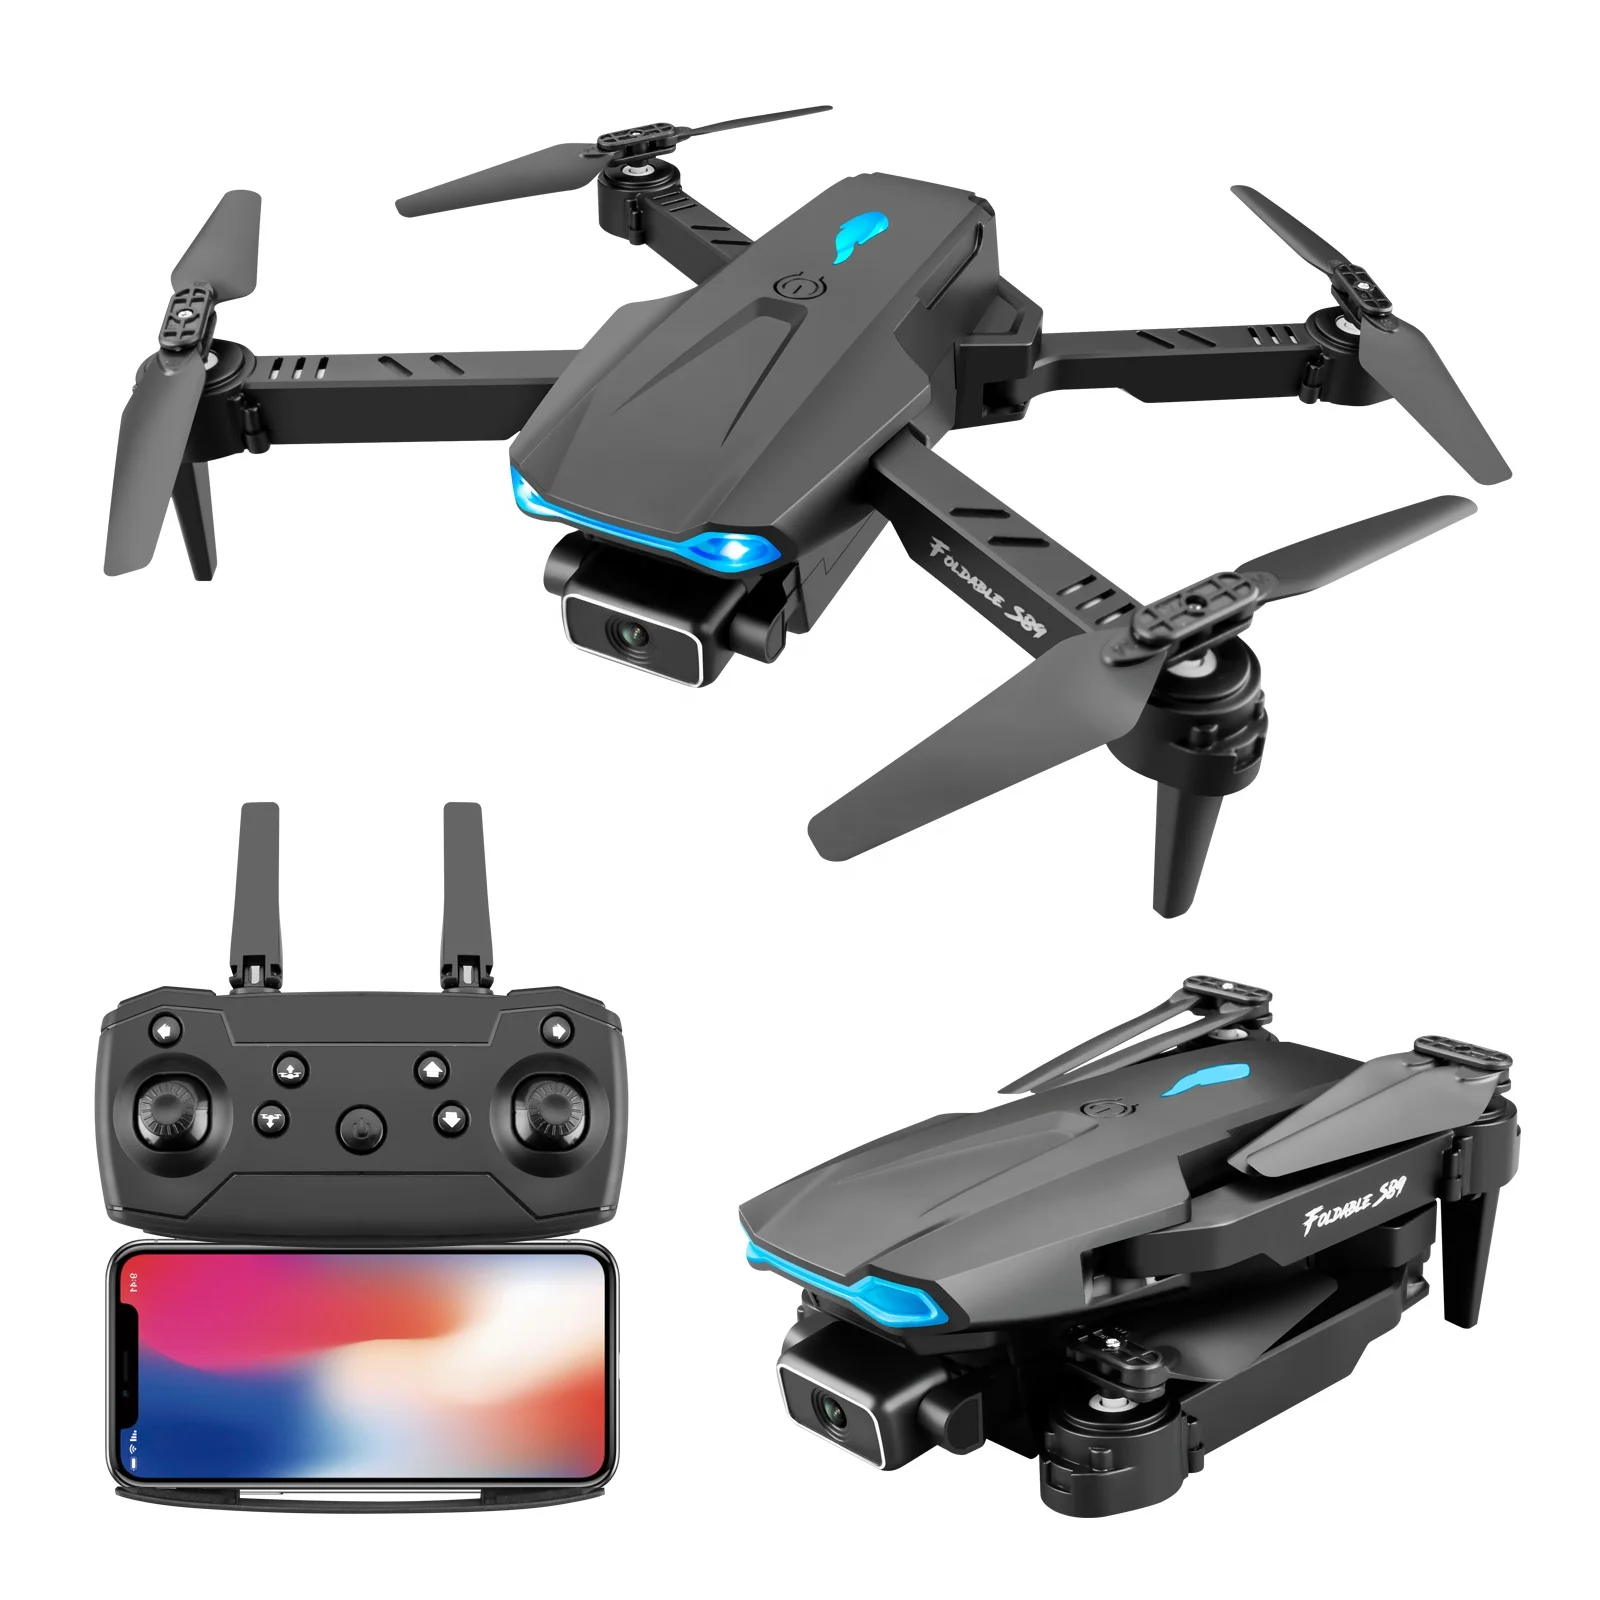 

New S89 pro Drone 4k HD Dual Camera 1080P WiFi Fpv Visual Positioning Drone Height Preservation Rc Quadcopter VS V4 Drone S89, Black / grey